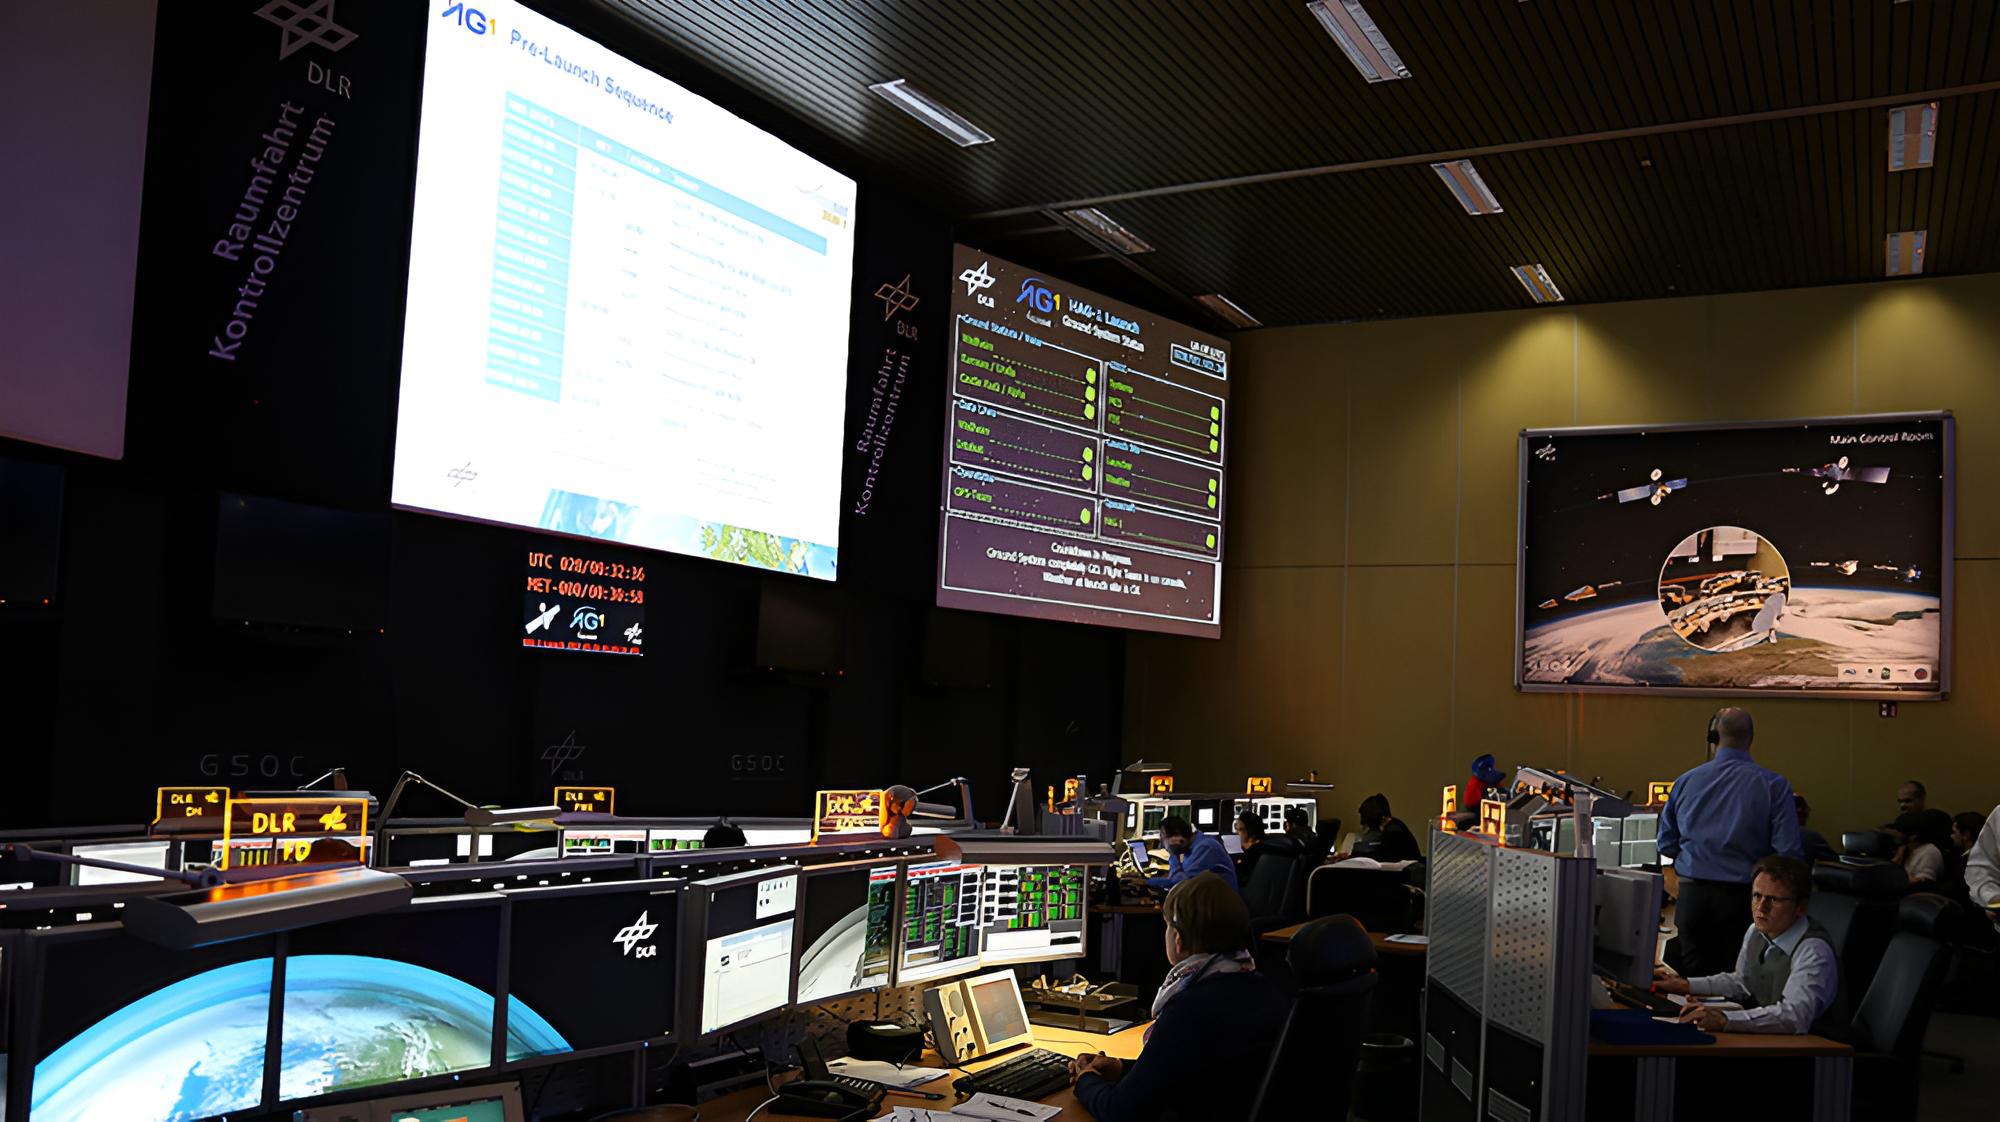 K1 during the launch of Hispasat 36W-1, view in the control room